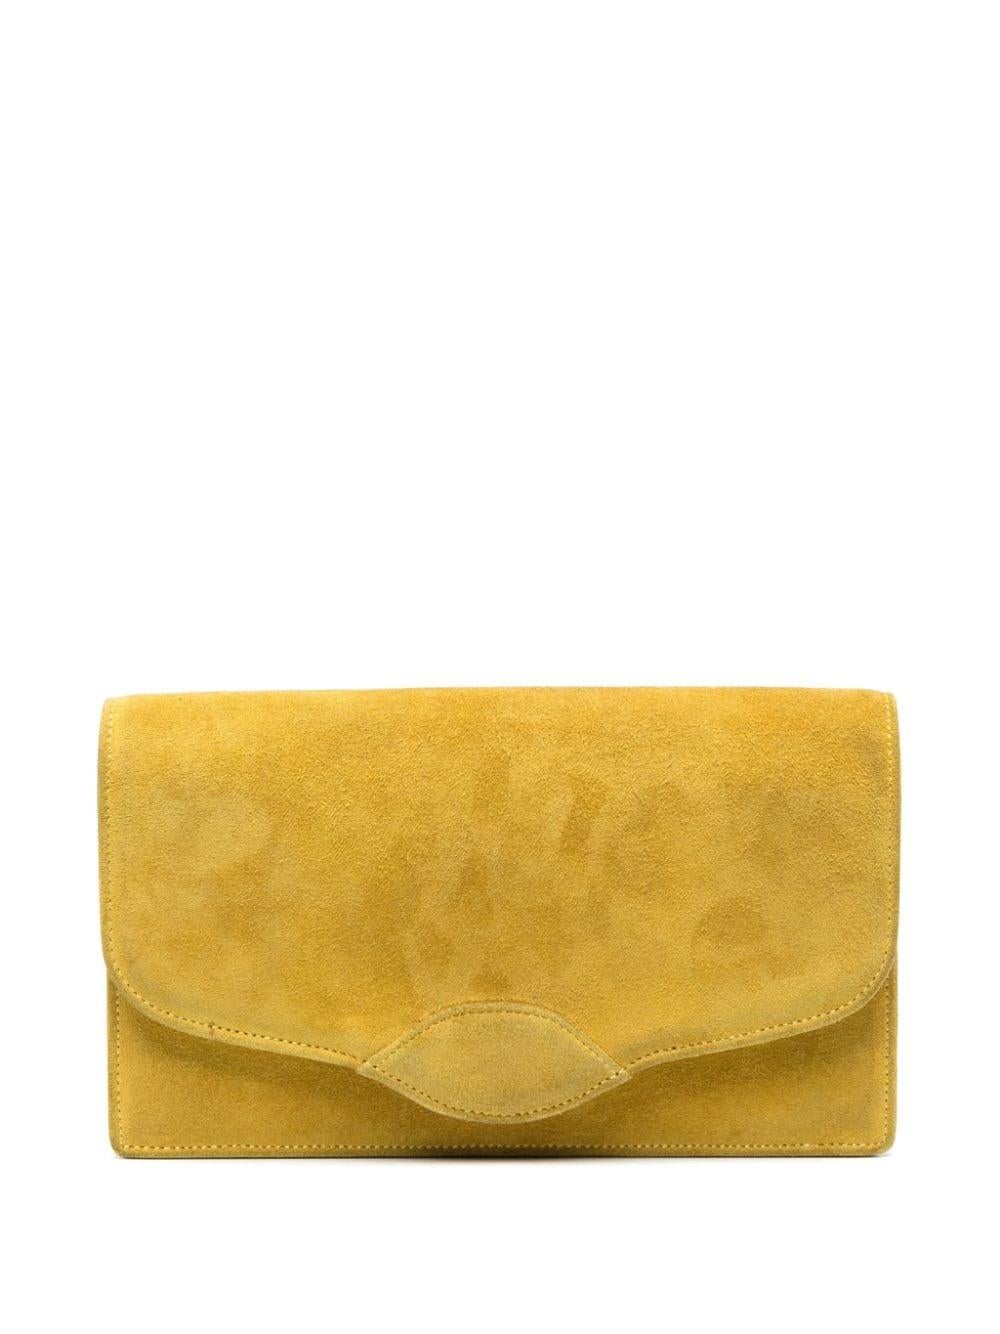 1970s Hermes Yellow Suede Clutch Bag For Sale 2